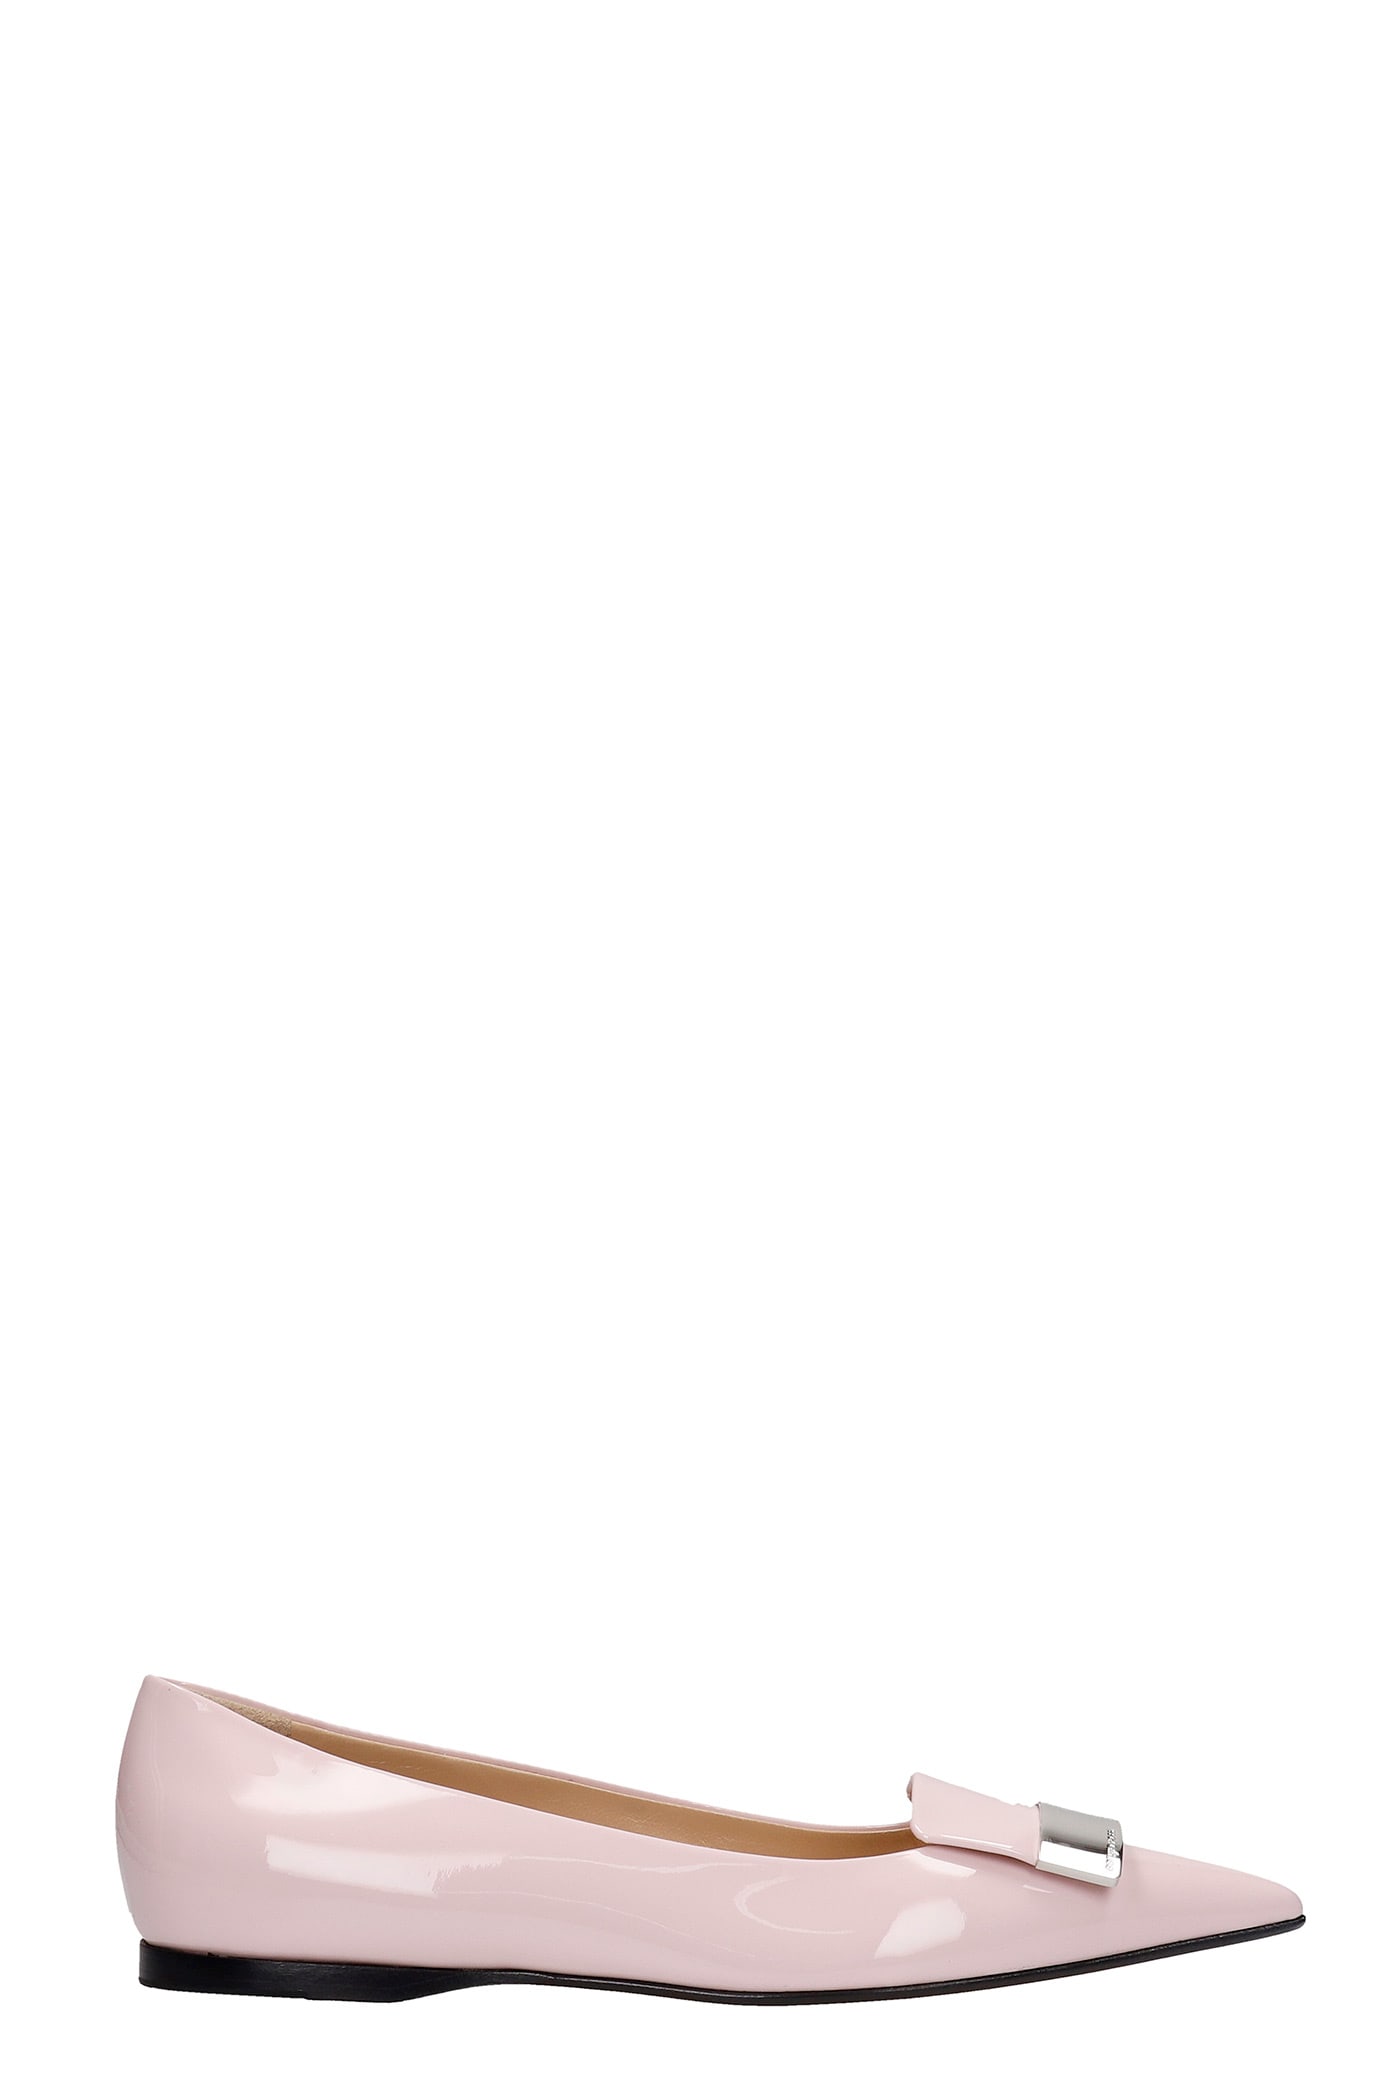 Sergio Rossi Ballet Flats In Rose-pink Patent Leather